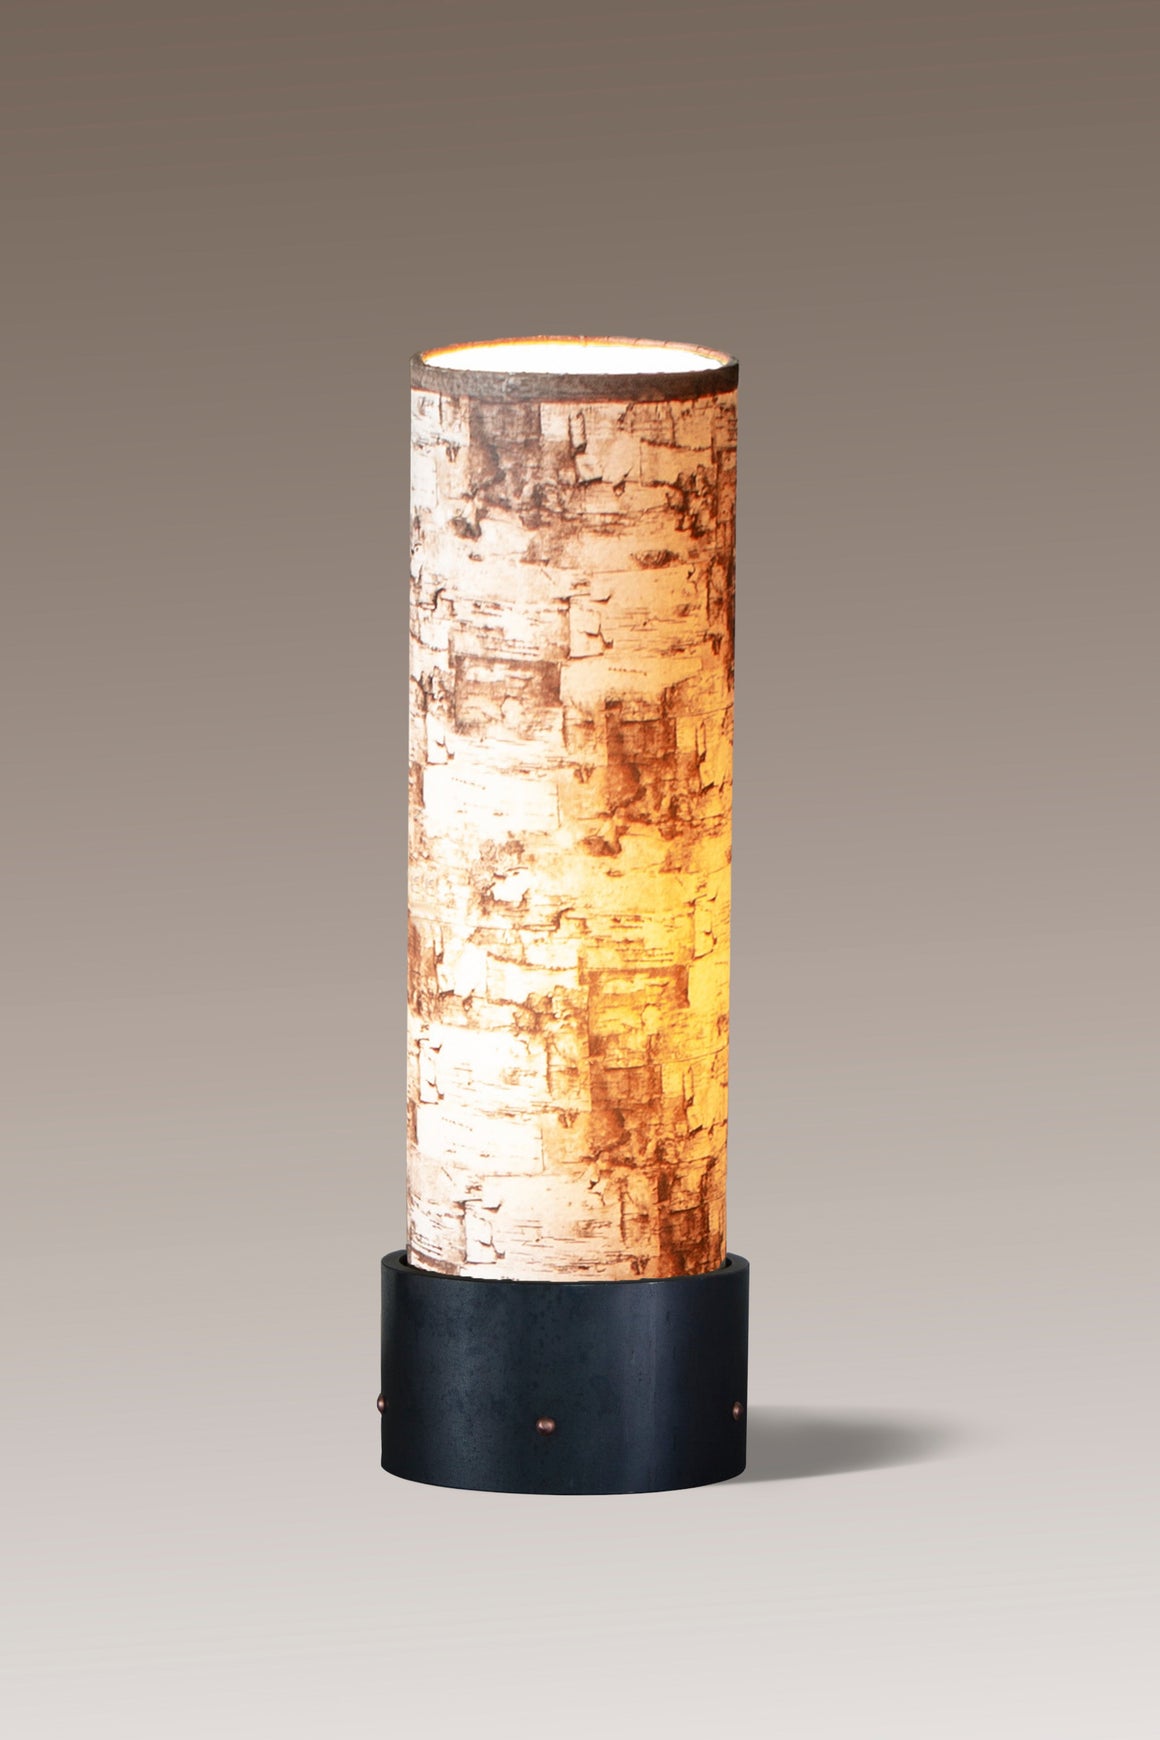 Luminaire Accent Lamp with Birch Bark Shade